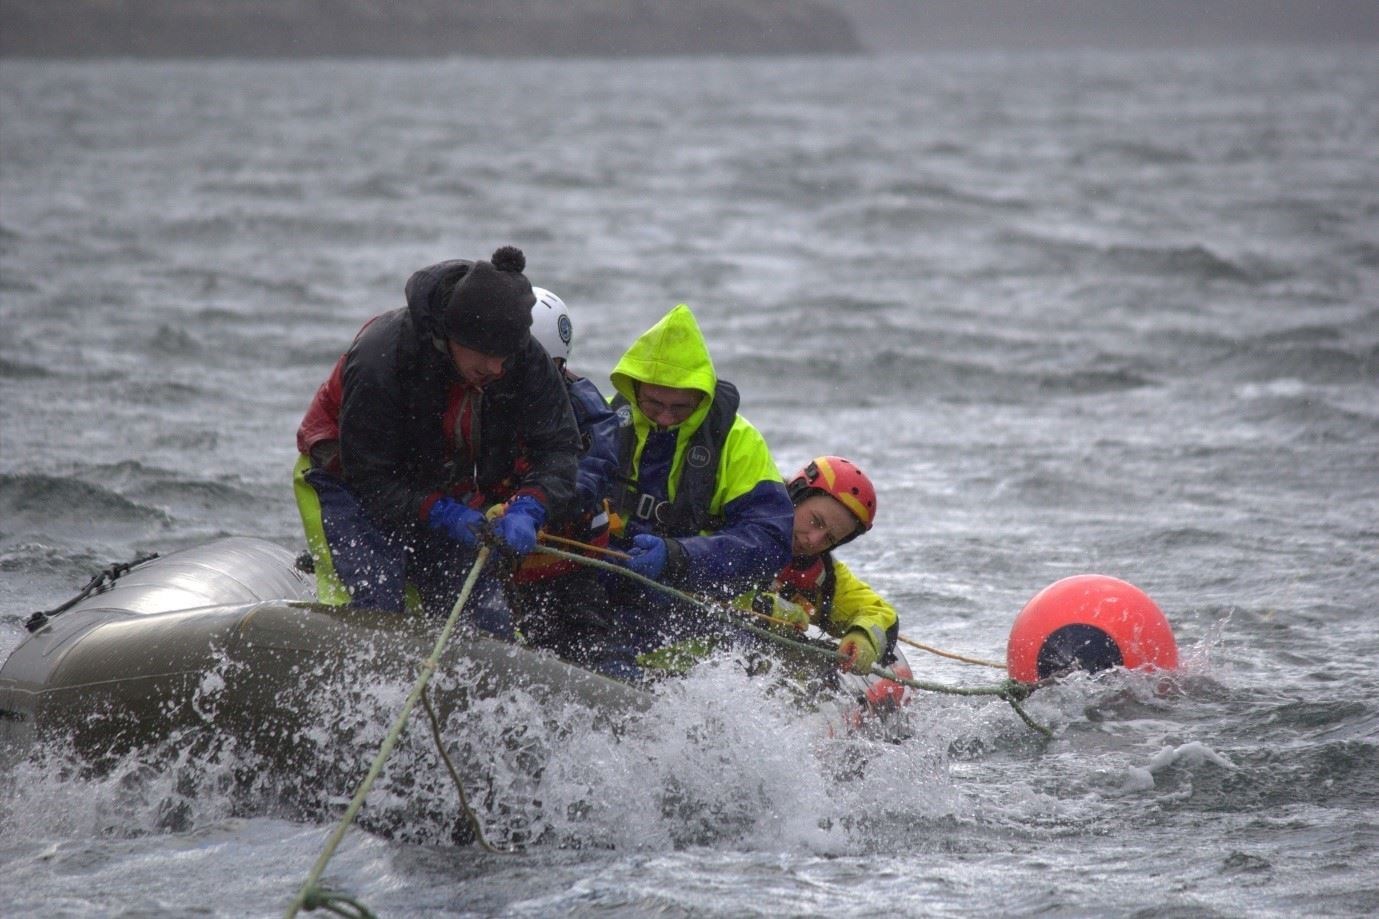 Fishermen and BDMLR disentanglement team members on Loch Broom practising the Nantucket Sleighride, a technique originally developed by whalers and adapted to safely attach to and approach an entangled whale in order to disentangle it. Picture: Scottish Entanglement Alliance (SEA).